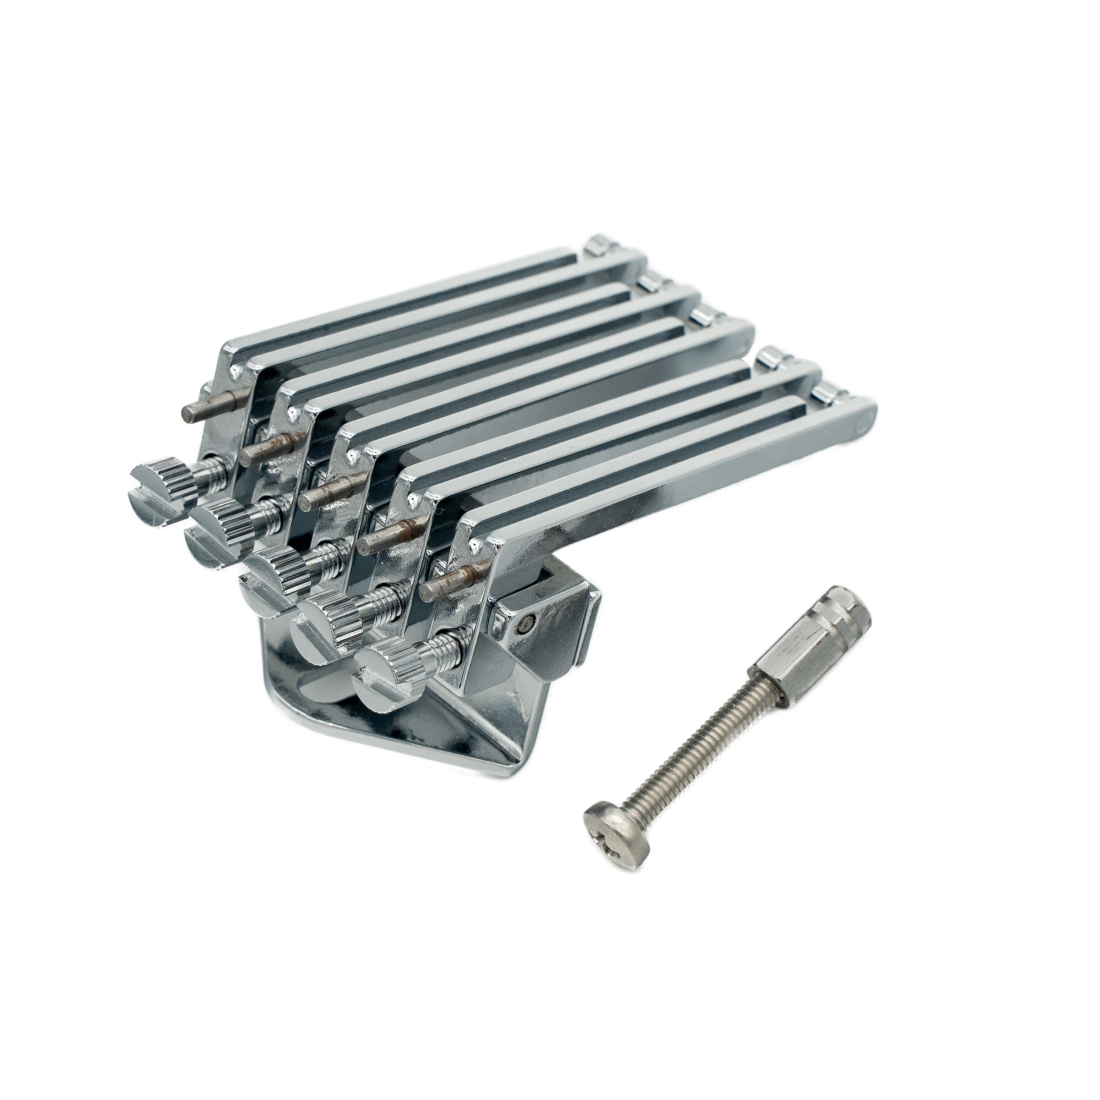 5-String Tensionator Tailpiece - Chrome